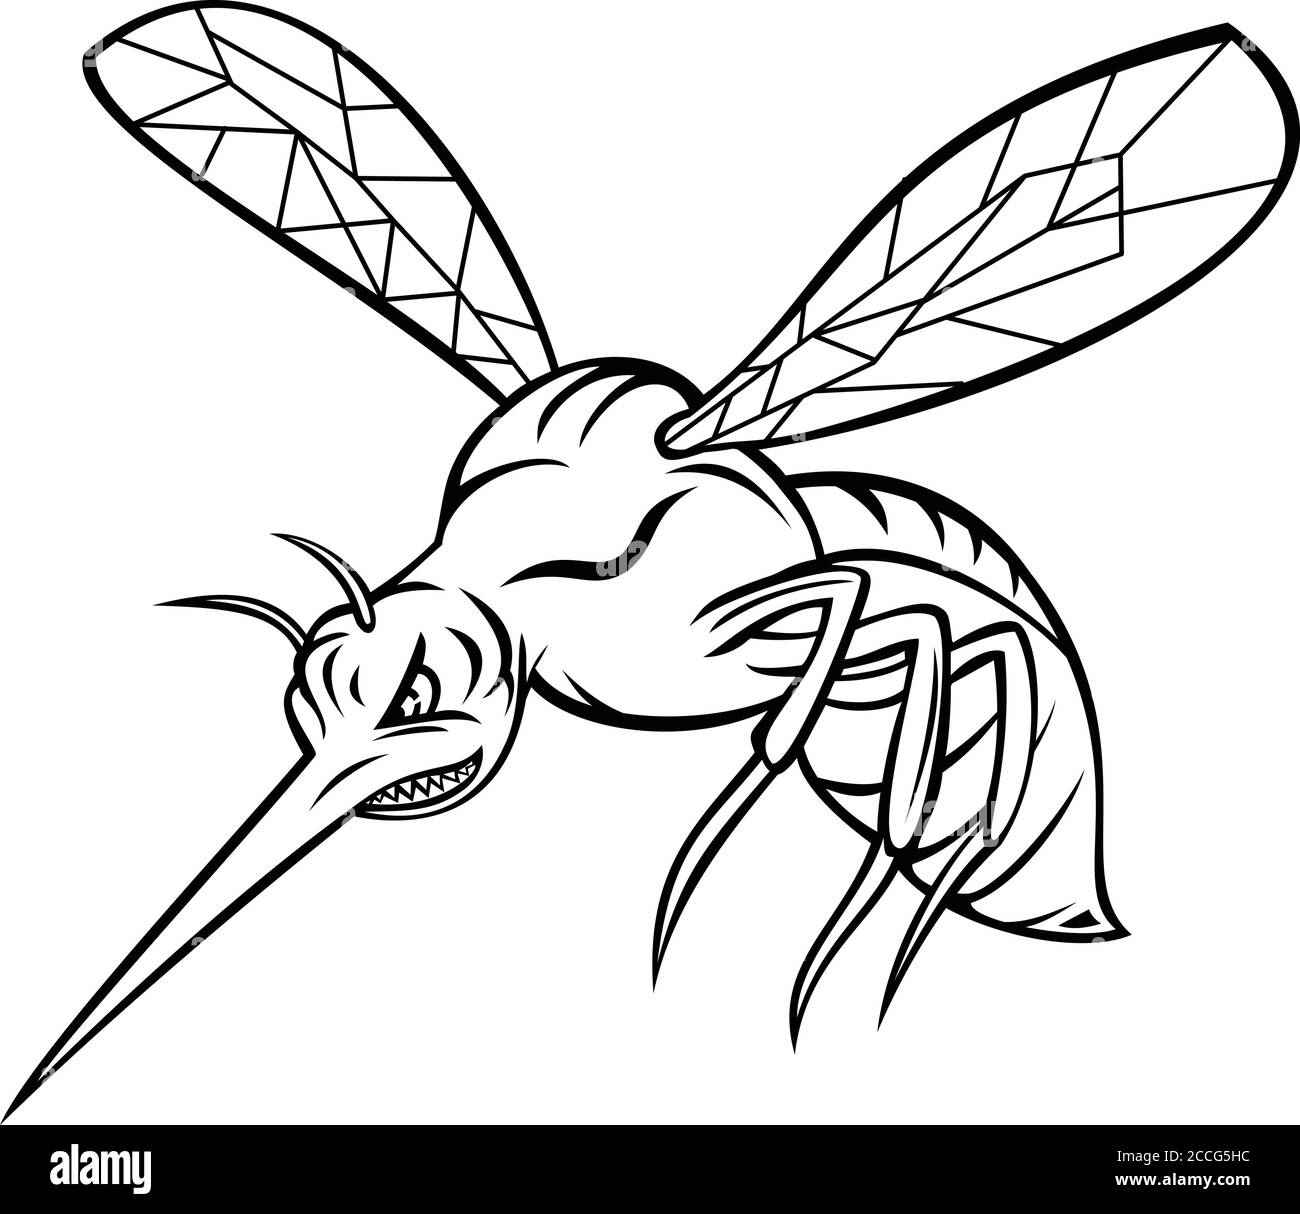 Mascot illustration of a yellow fever mosquito or Aedes aegypti, a mosquito that can spread dengue fever, chikungunya, Zika fever virus, flying on iso Stock Vector